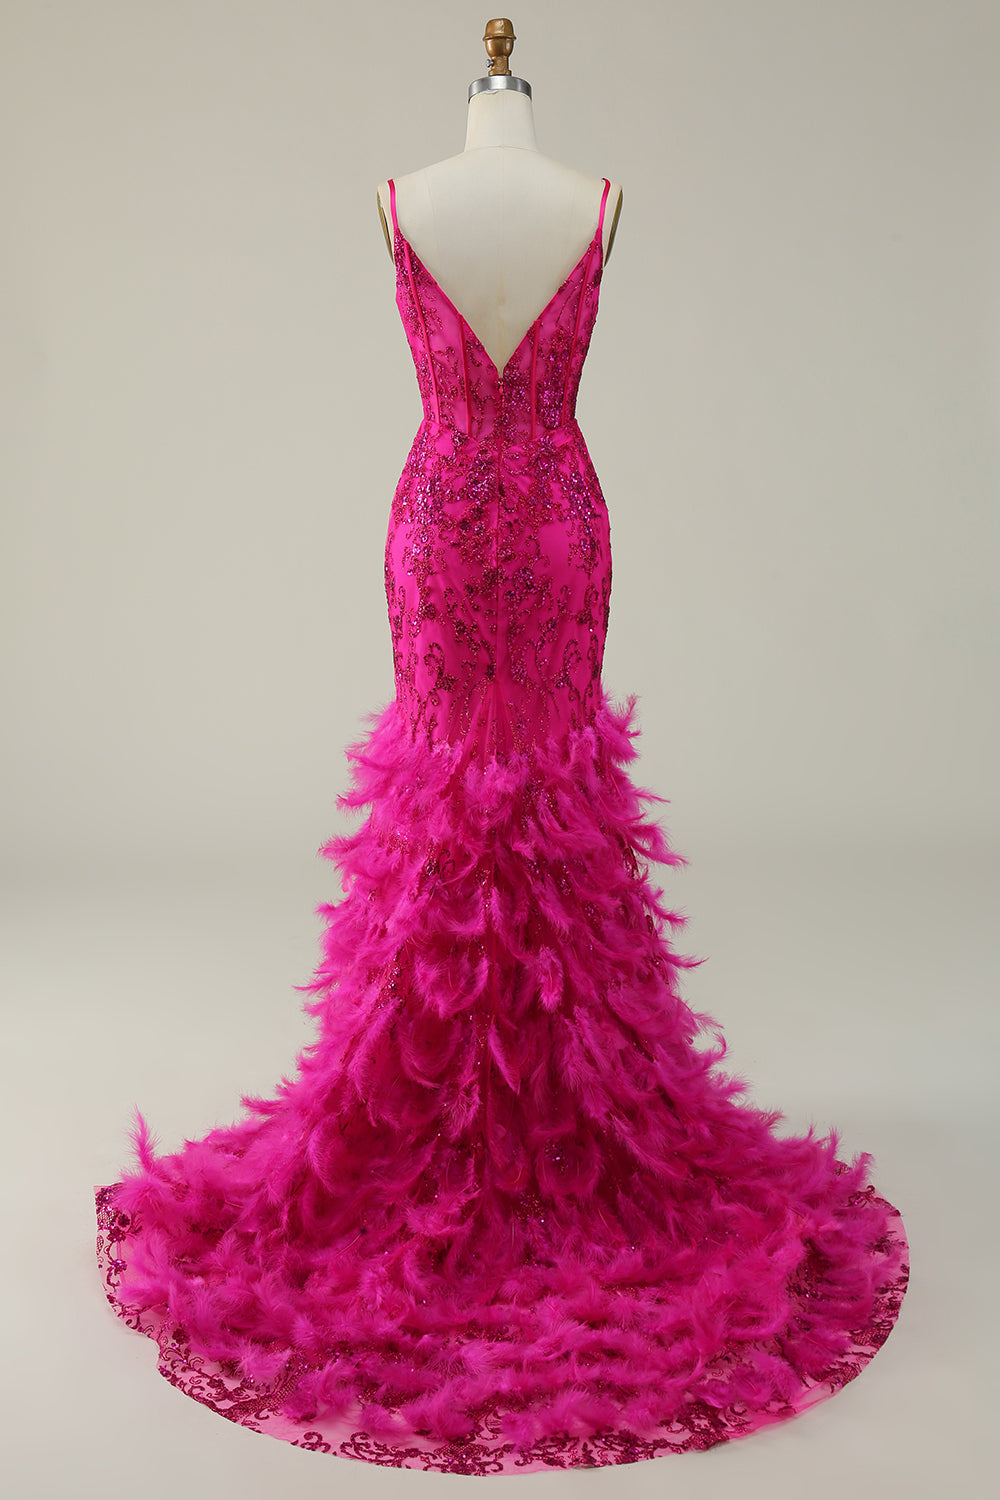 Sparkly Fuchsia Mermaid Long Sequin Prom Dress with Feathers